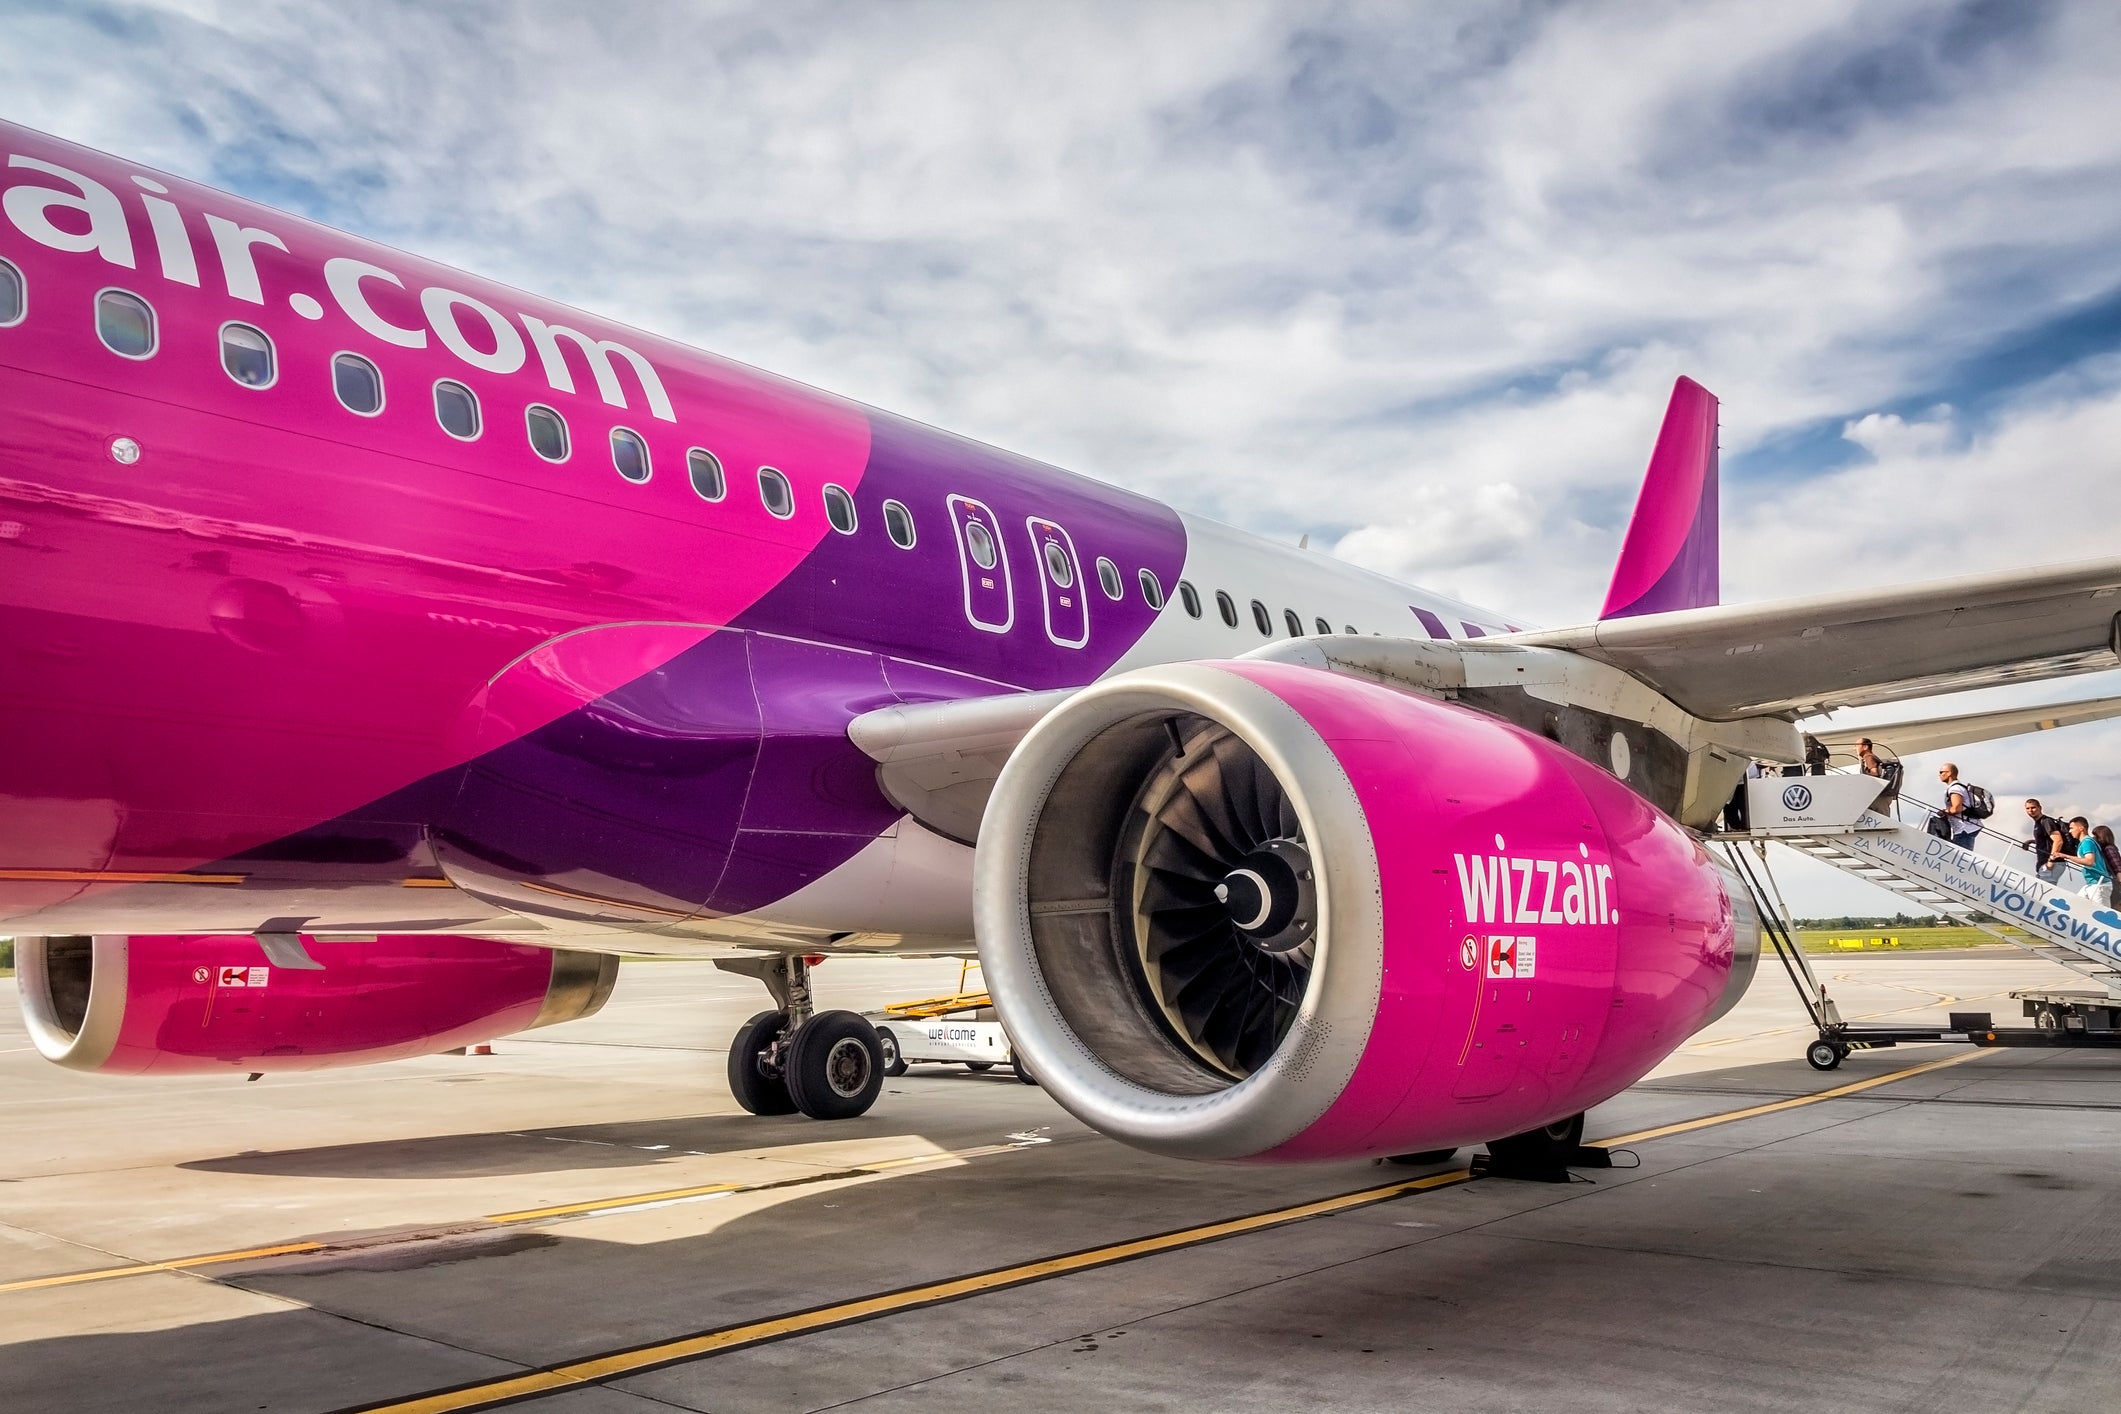 Mr Quirke described Wizz Air’s treatment as ‘shocking, shambolic and shoddy’